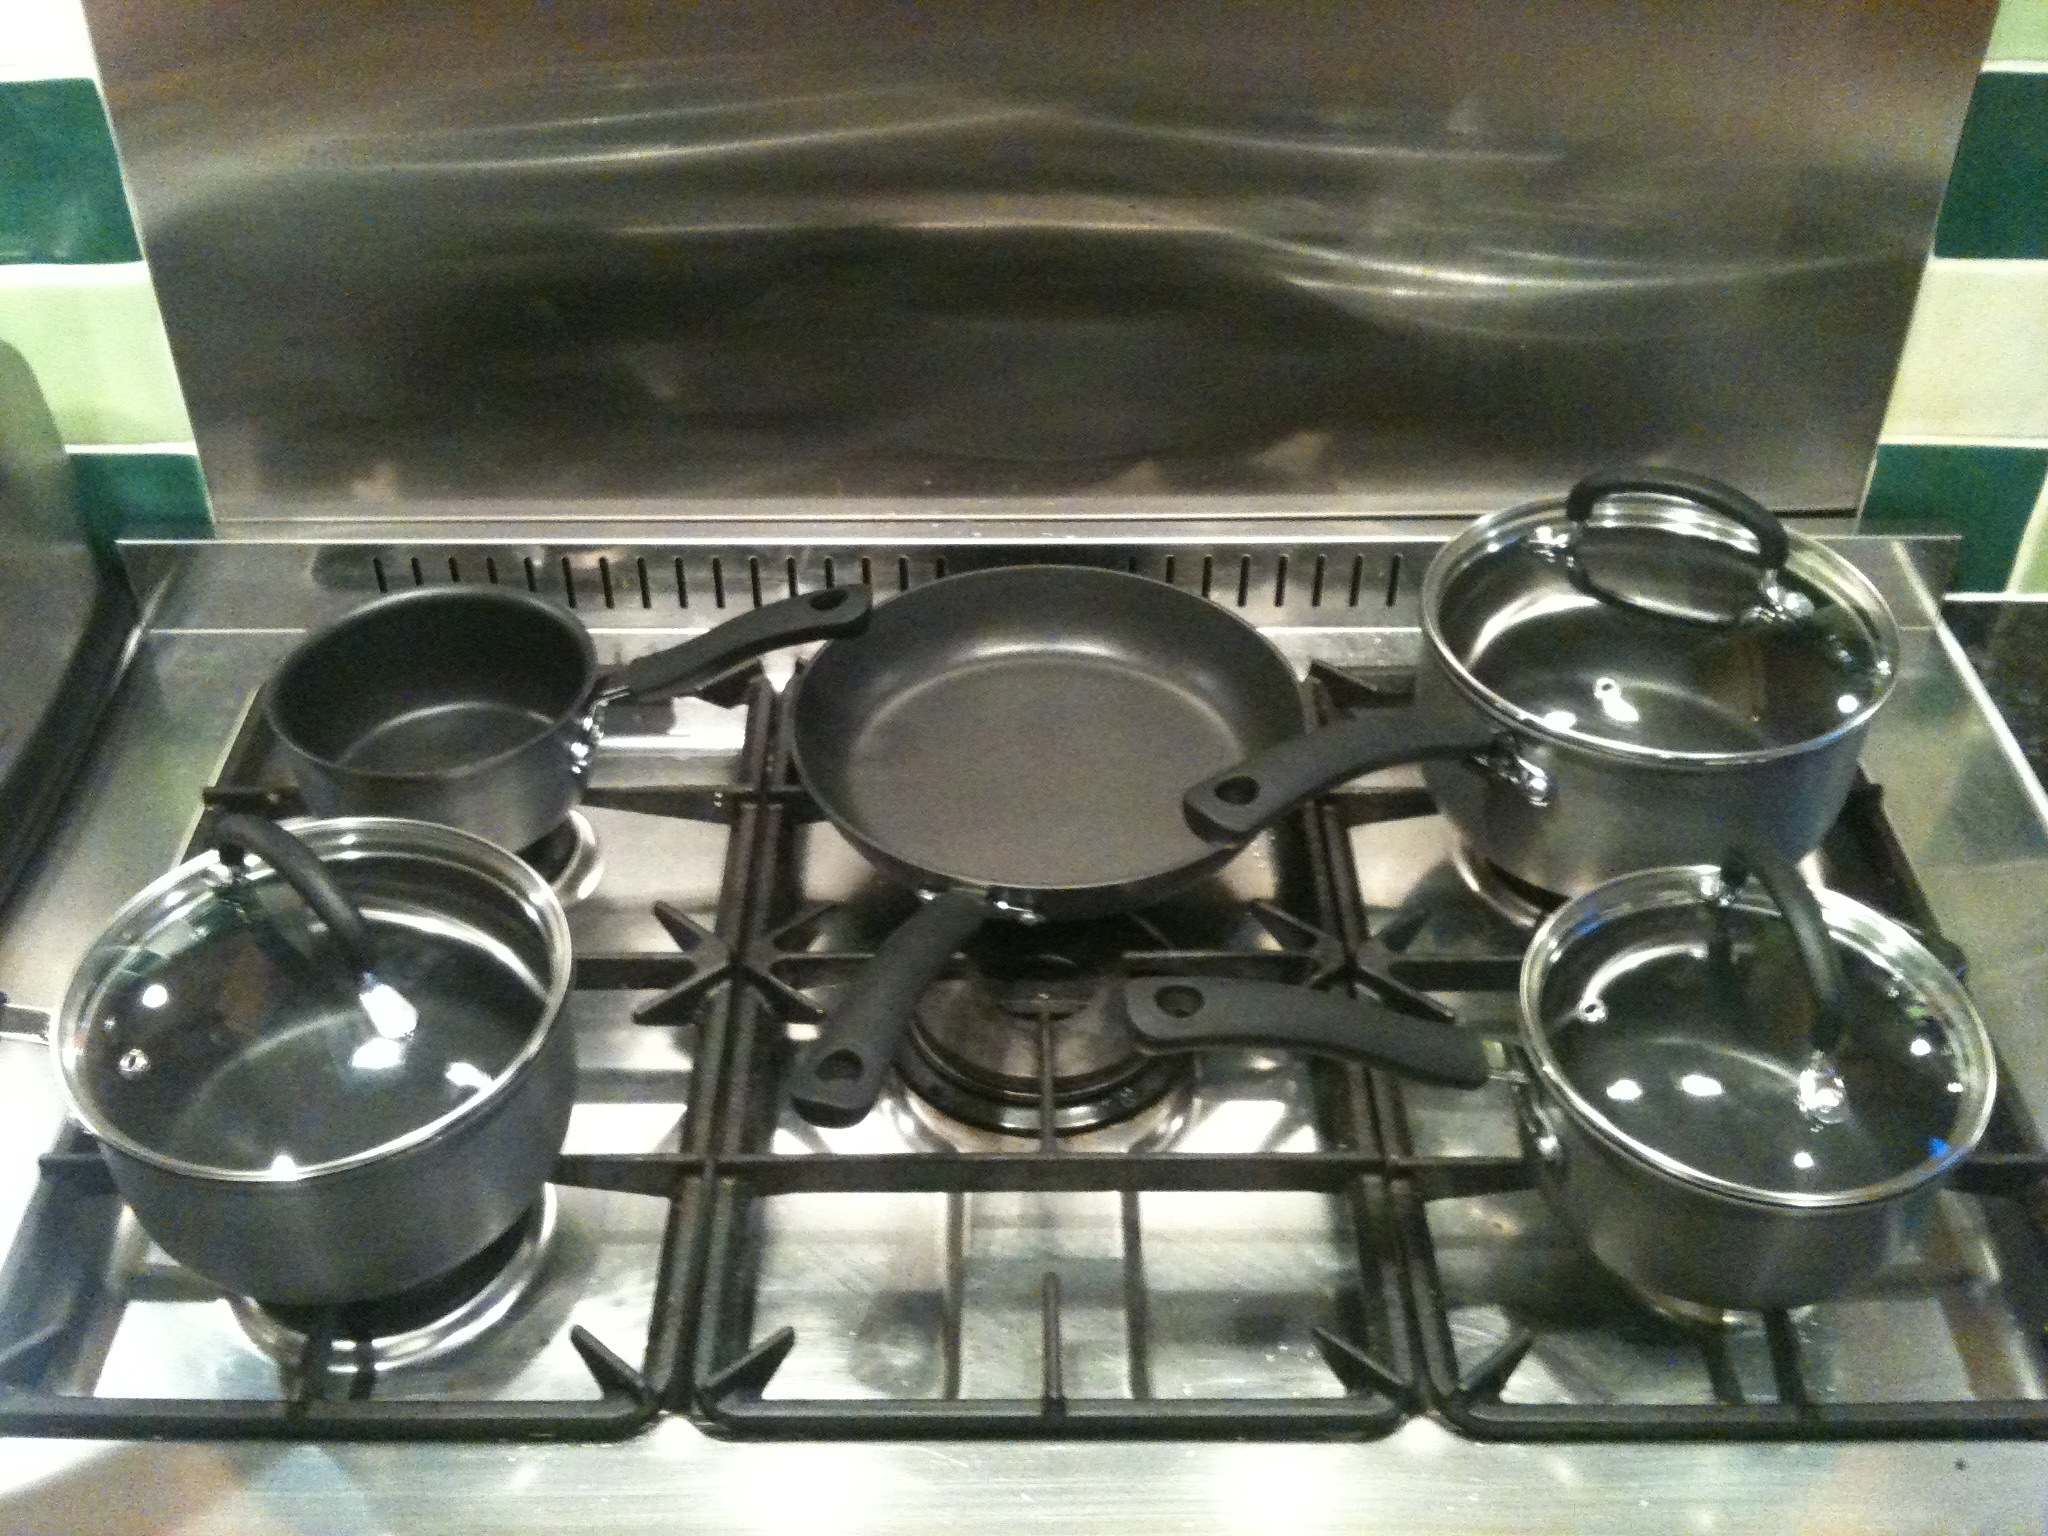 three saucepans sitting on top of the stove with one being filled